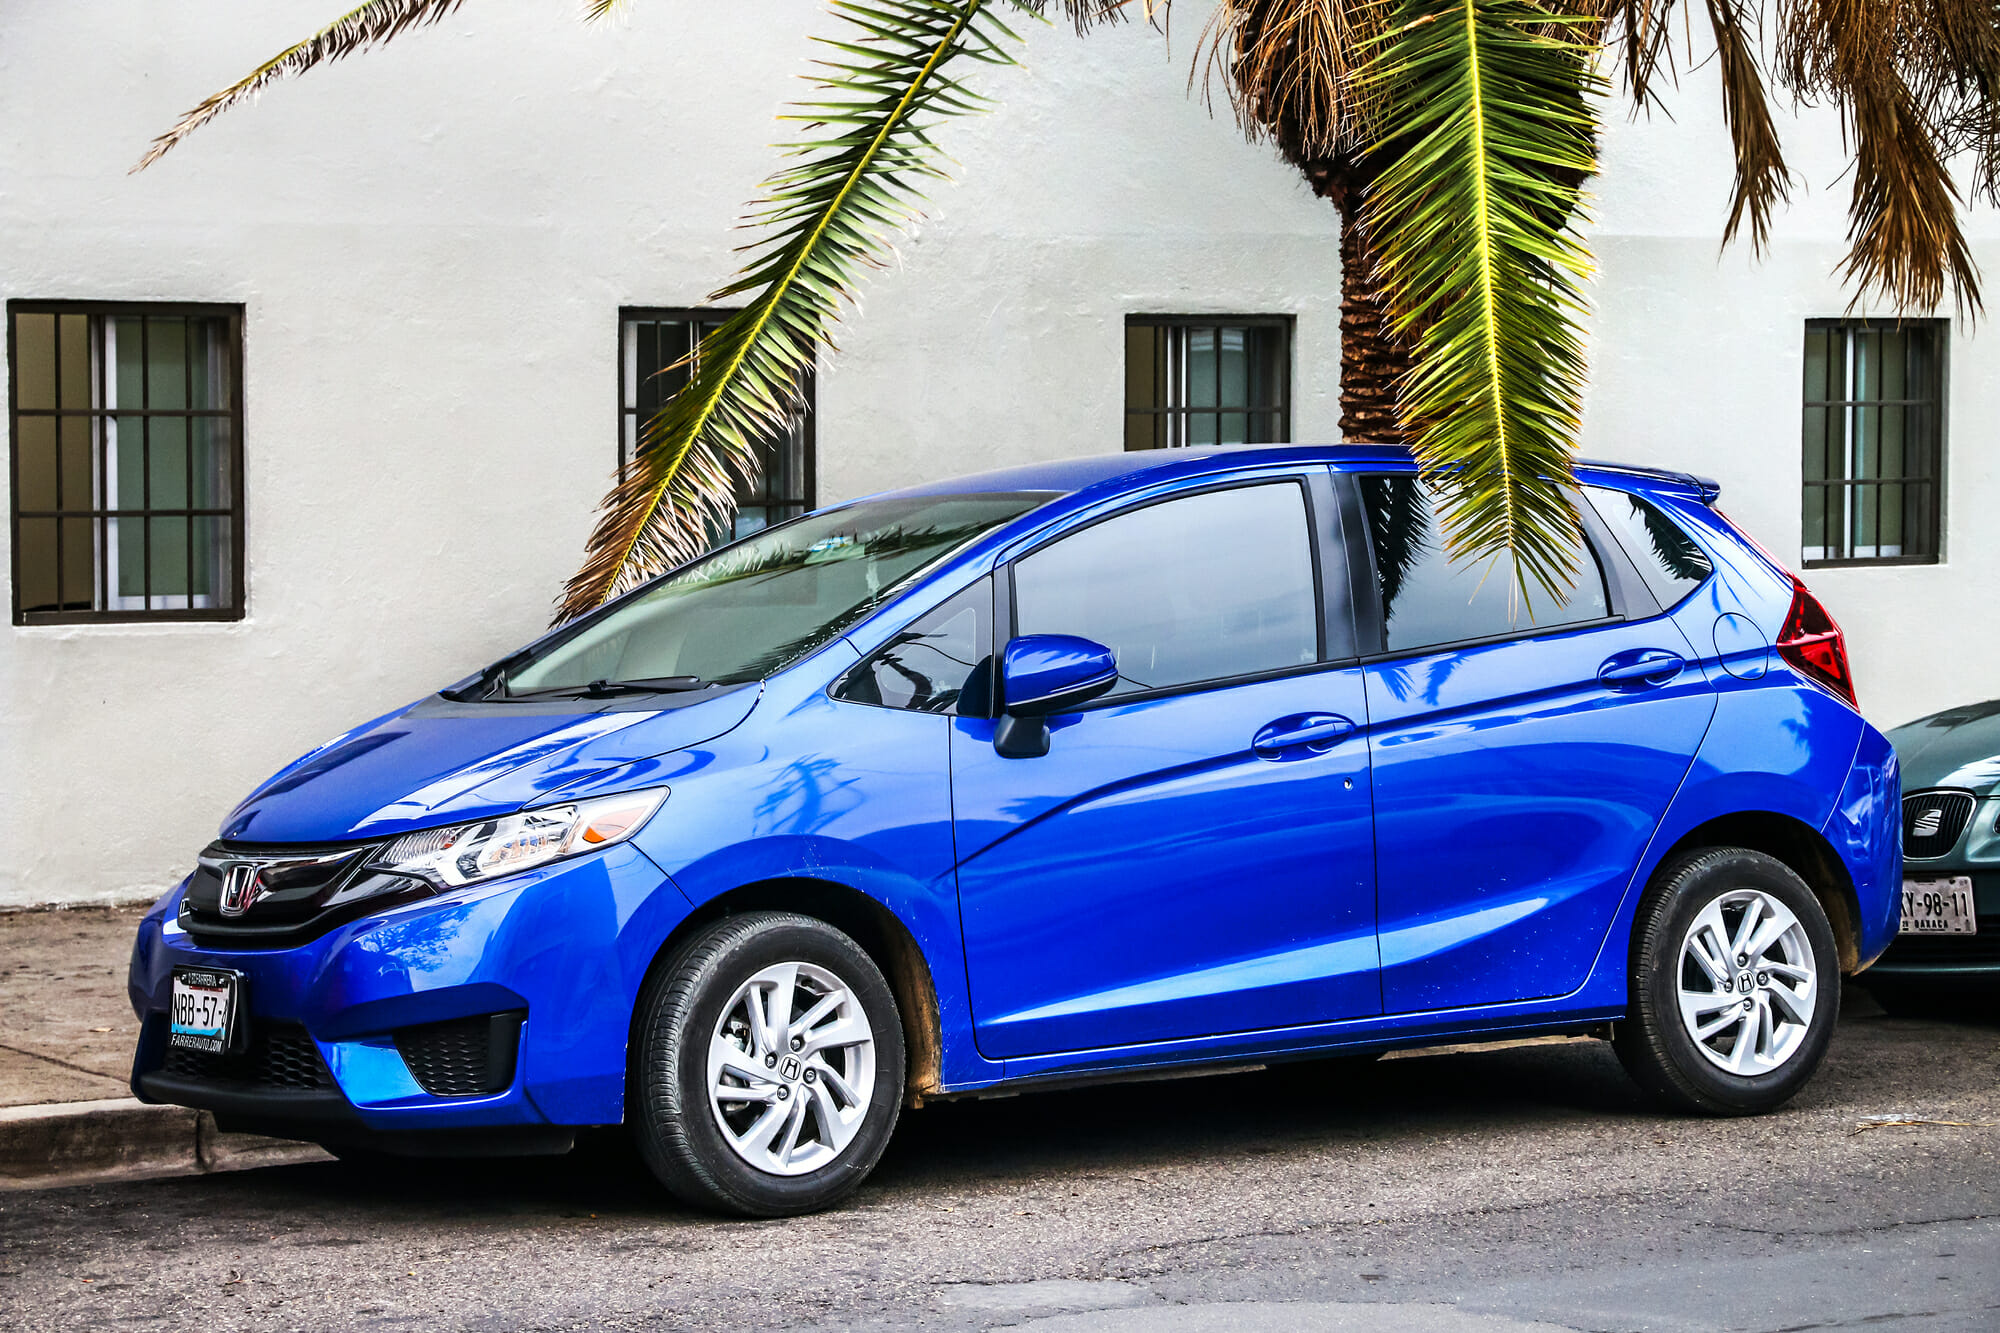 Blue Honda Fit on city street with palm trees - Vehicle History